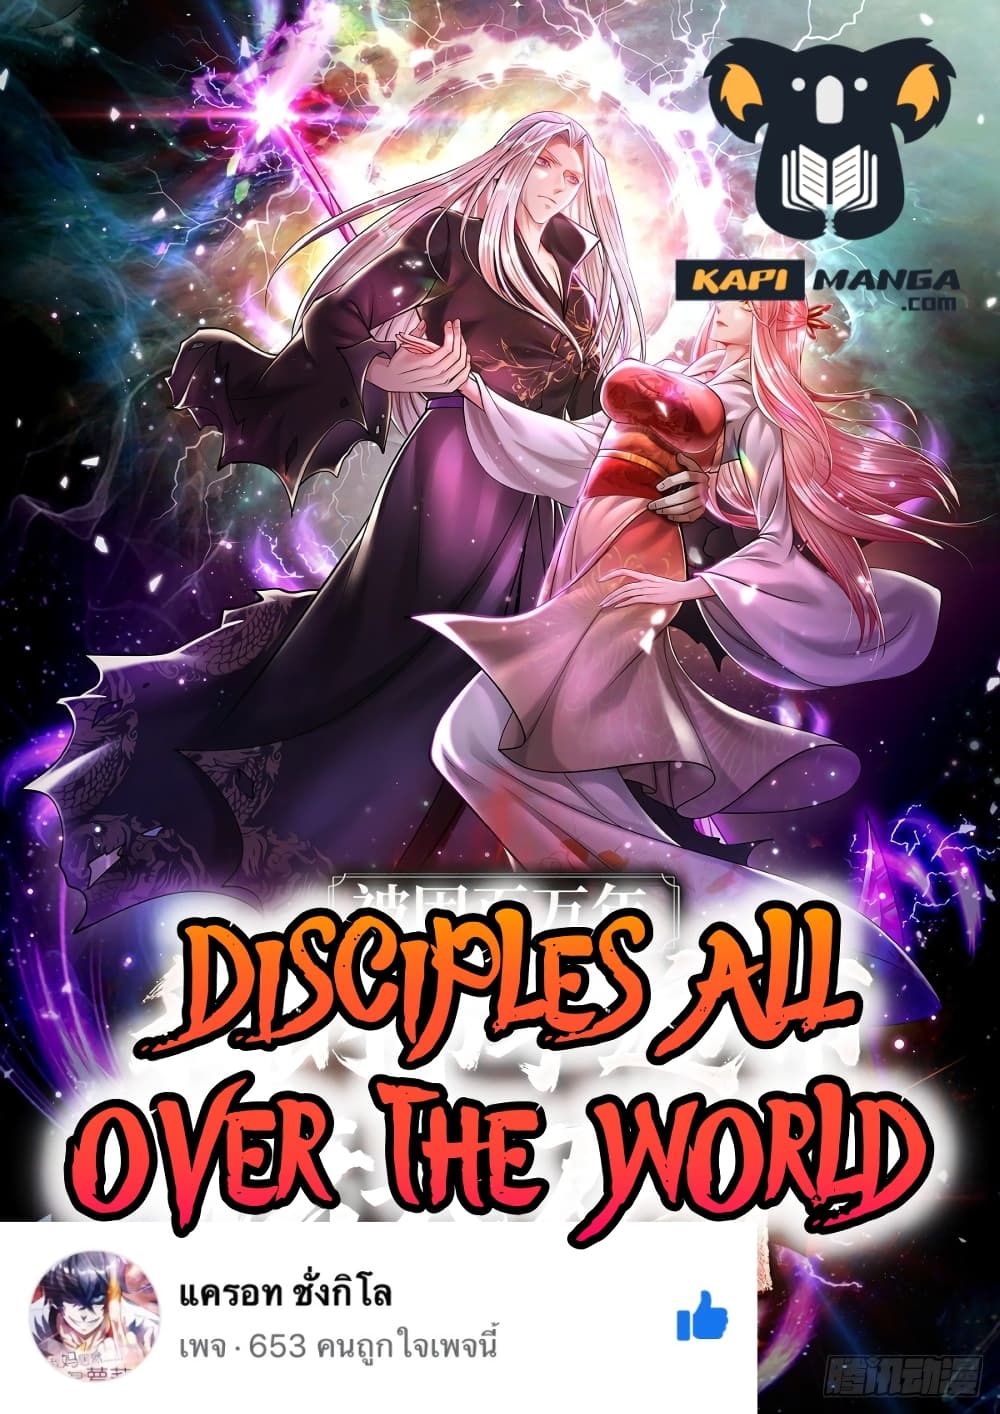 Disciples All Over the World 233-233